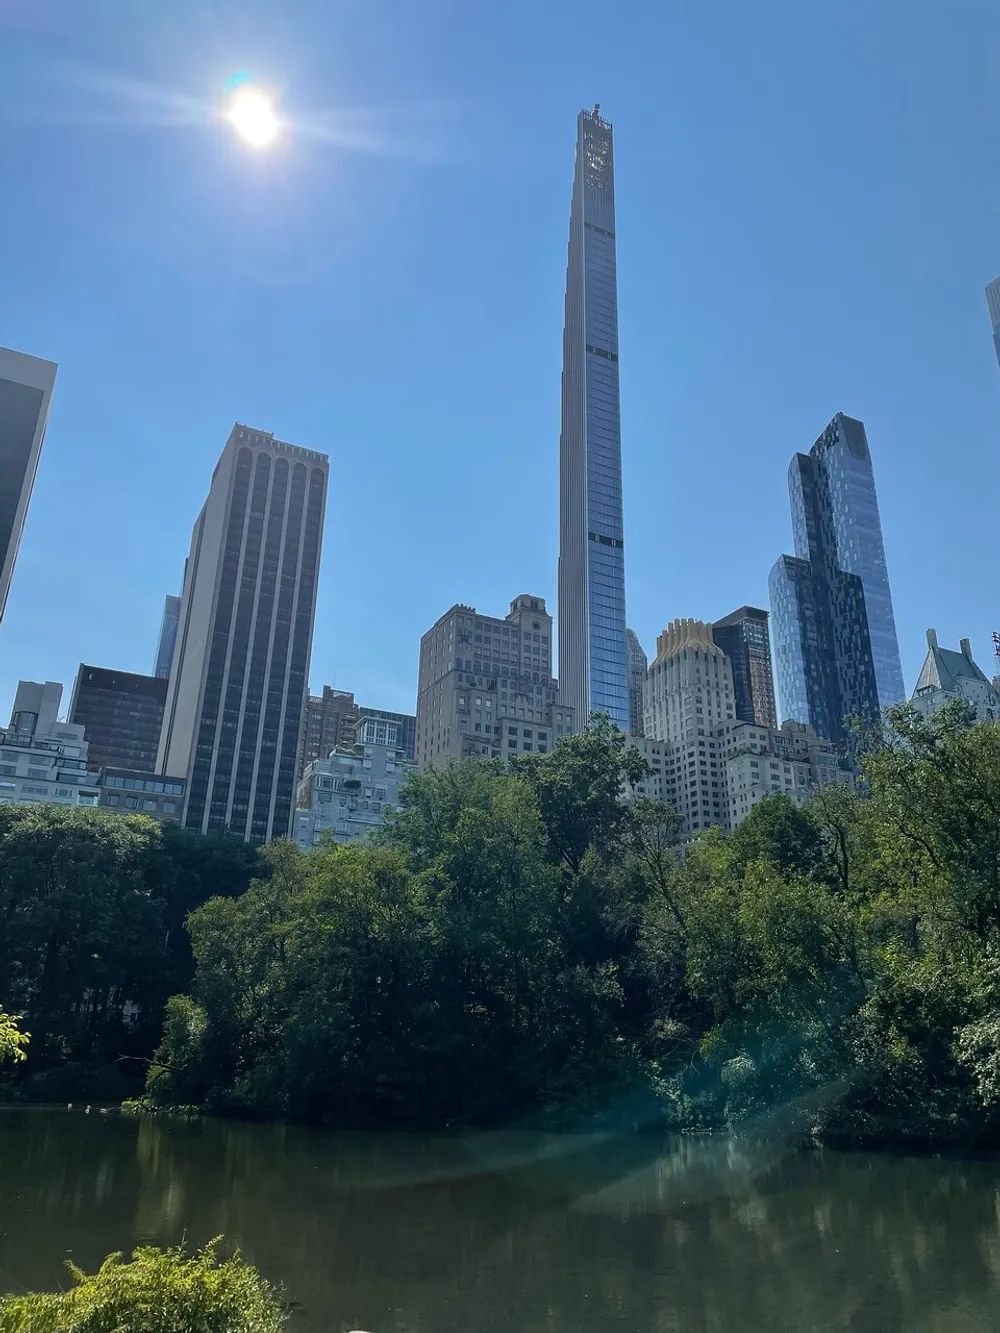 The image shows a view of a tranquil body of water surrounded by lush greenery in the foreground with towering skyscrapers against a clear blue sky in the background dominated by a particularly tall and slender building